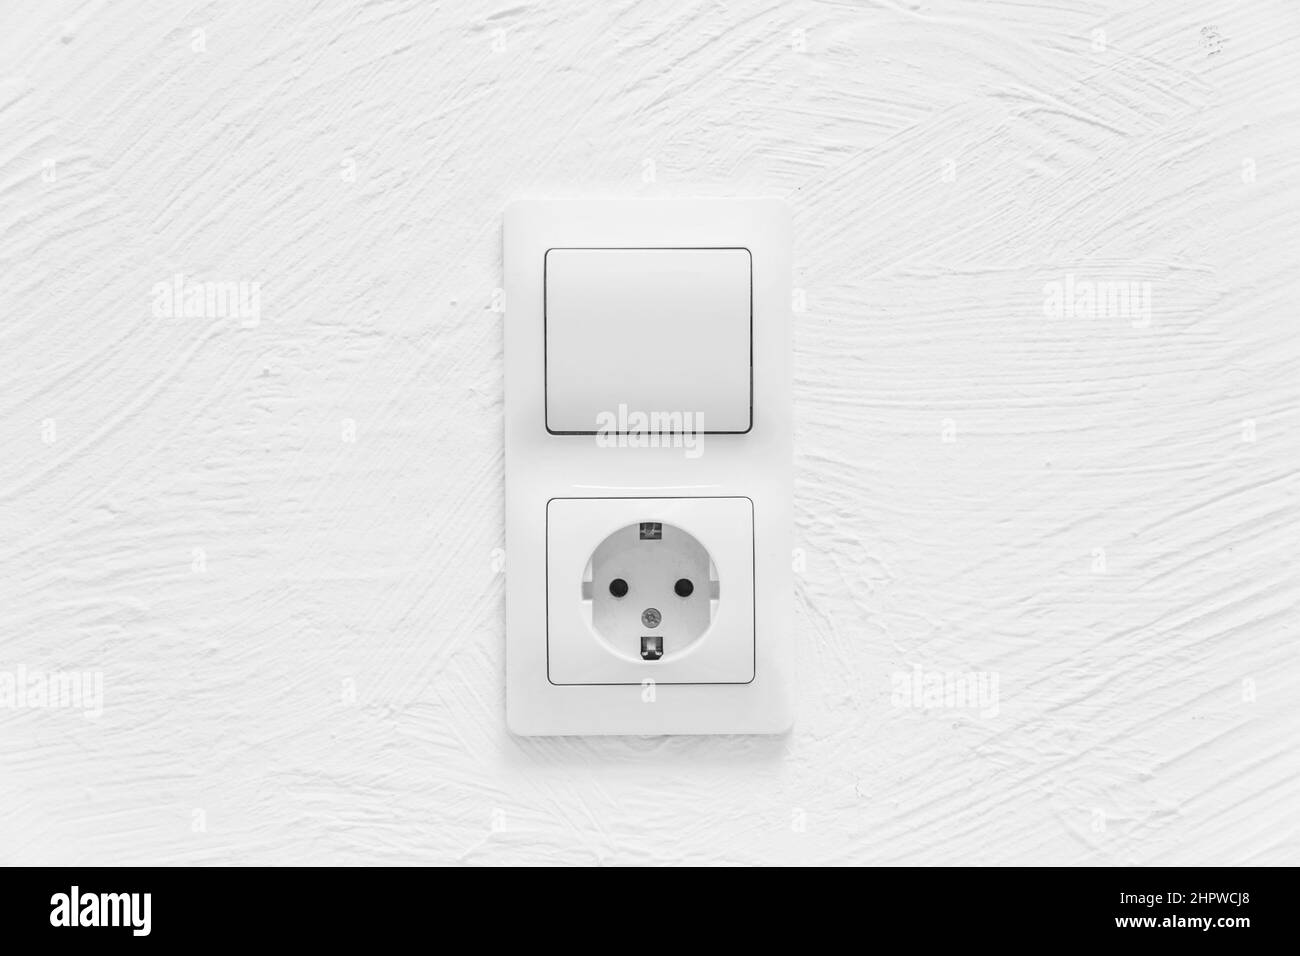 Socket and light off turn on button on the background of the switch white wall of the house. Stock Photo